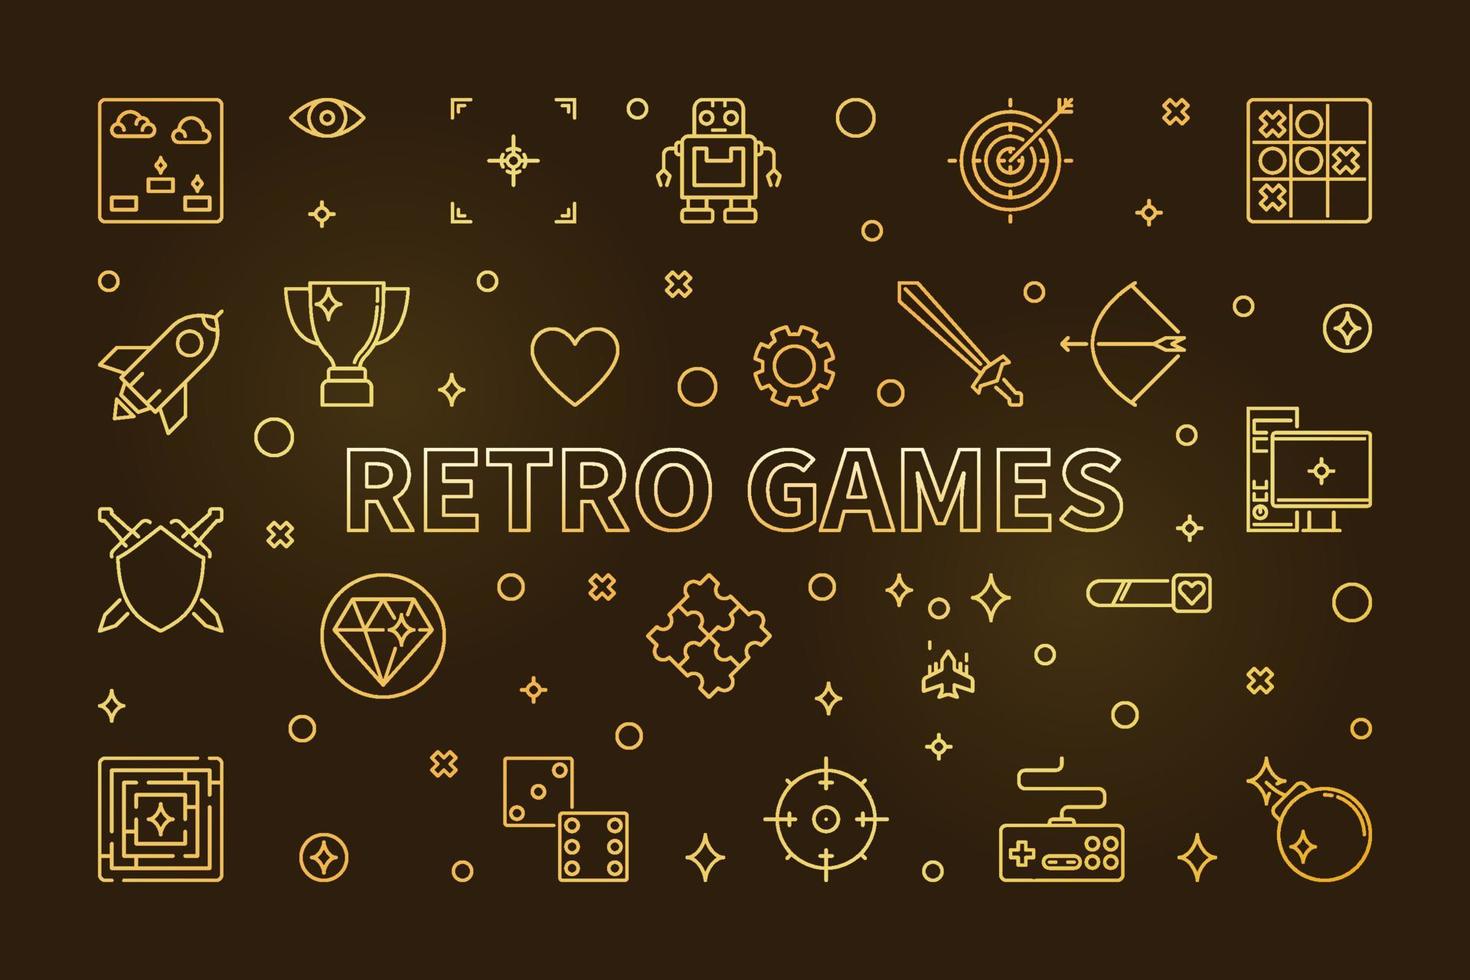 Retro Games vector concept golden banner in thin line style